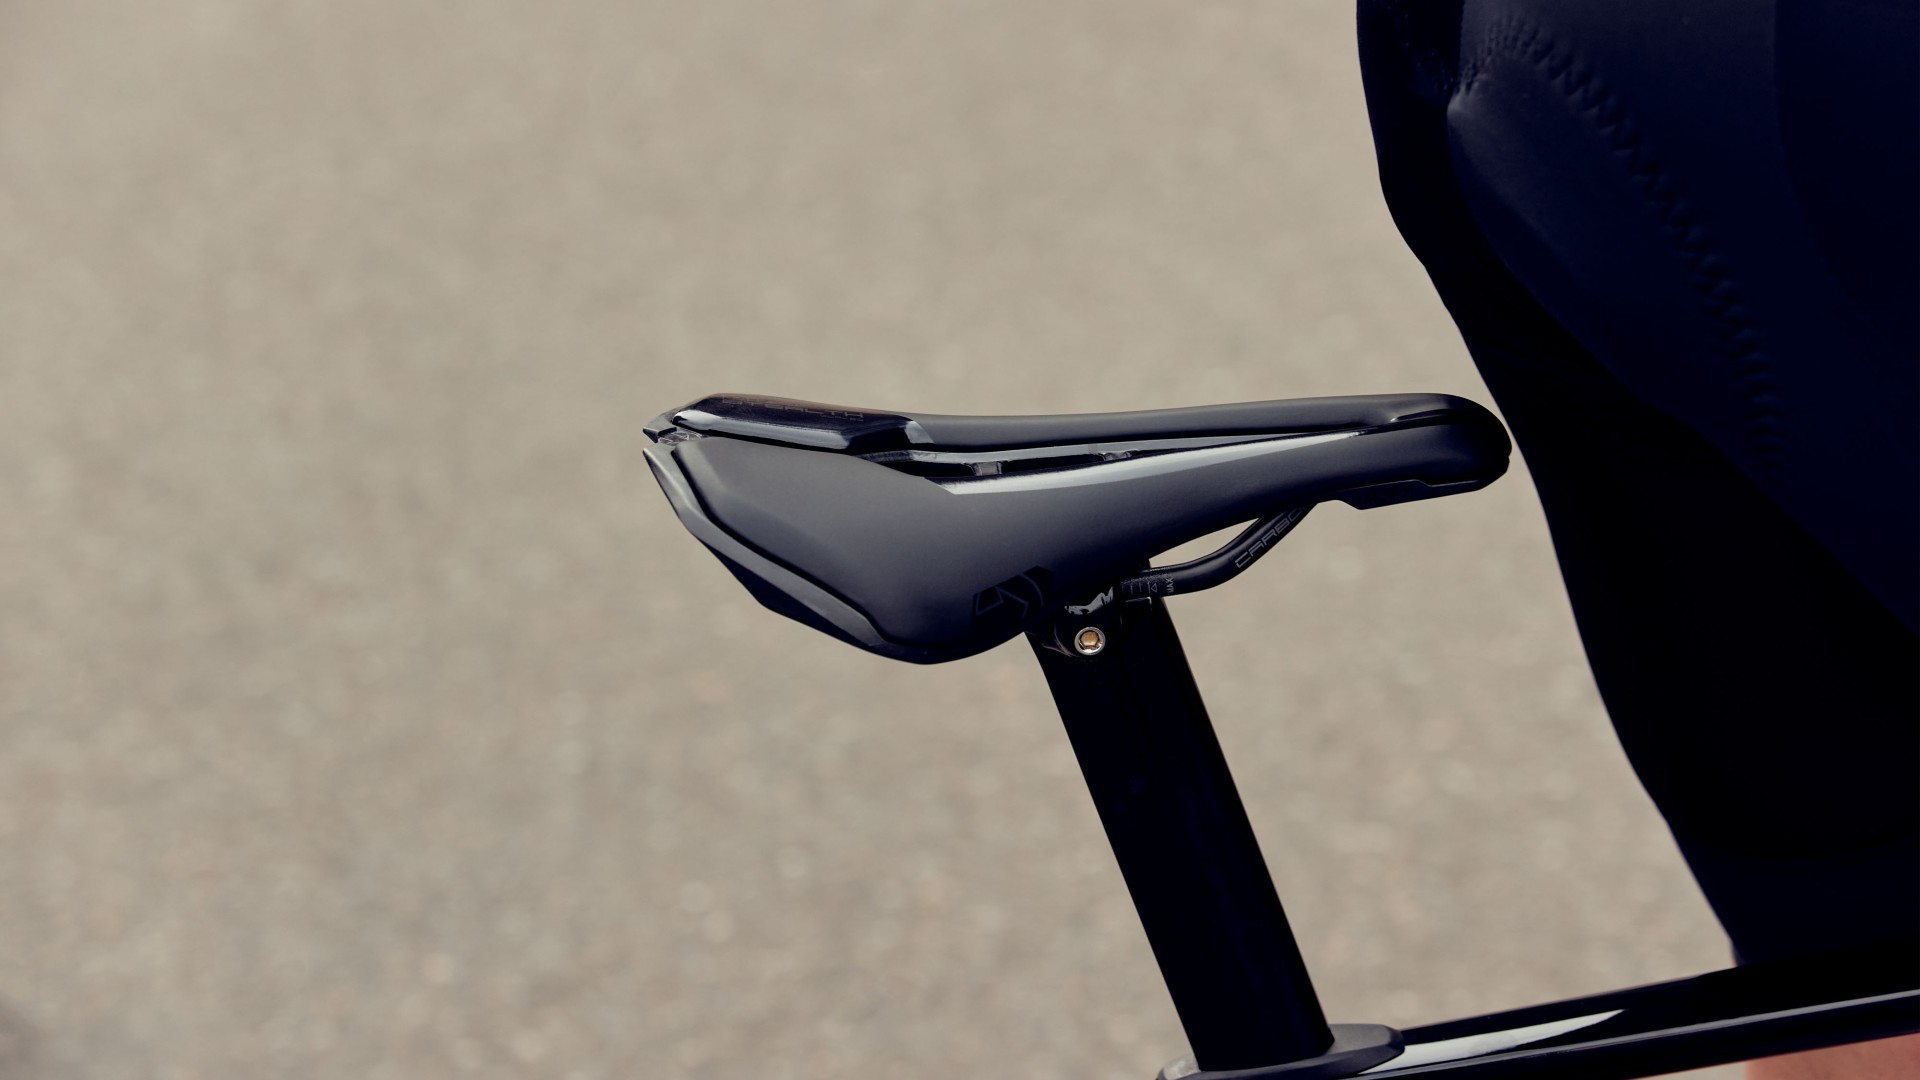 New PRO Stealth Curved saddle designed for better stability in an